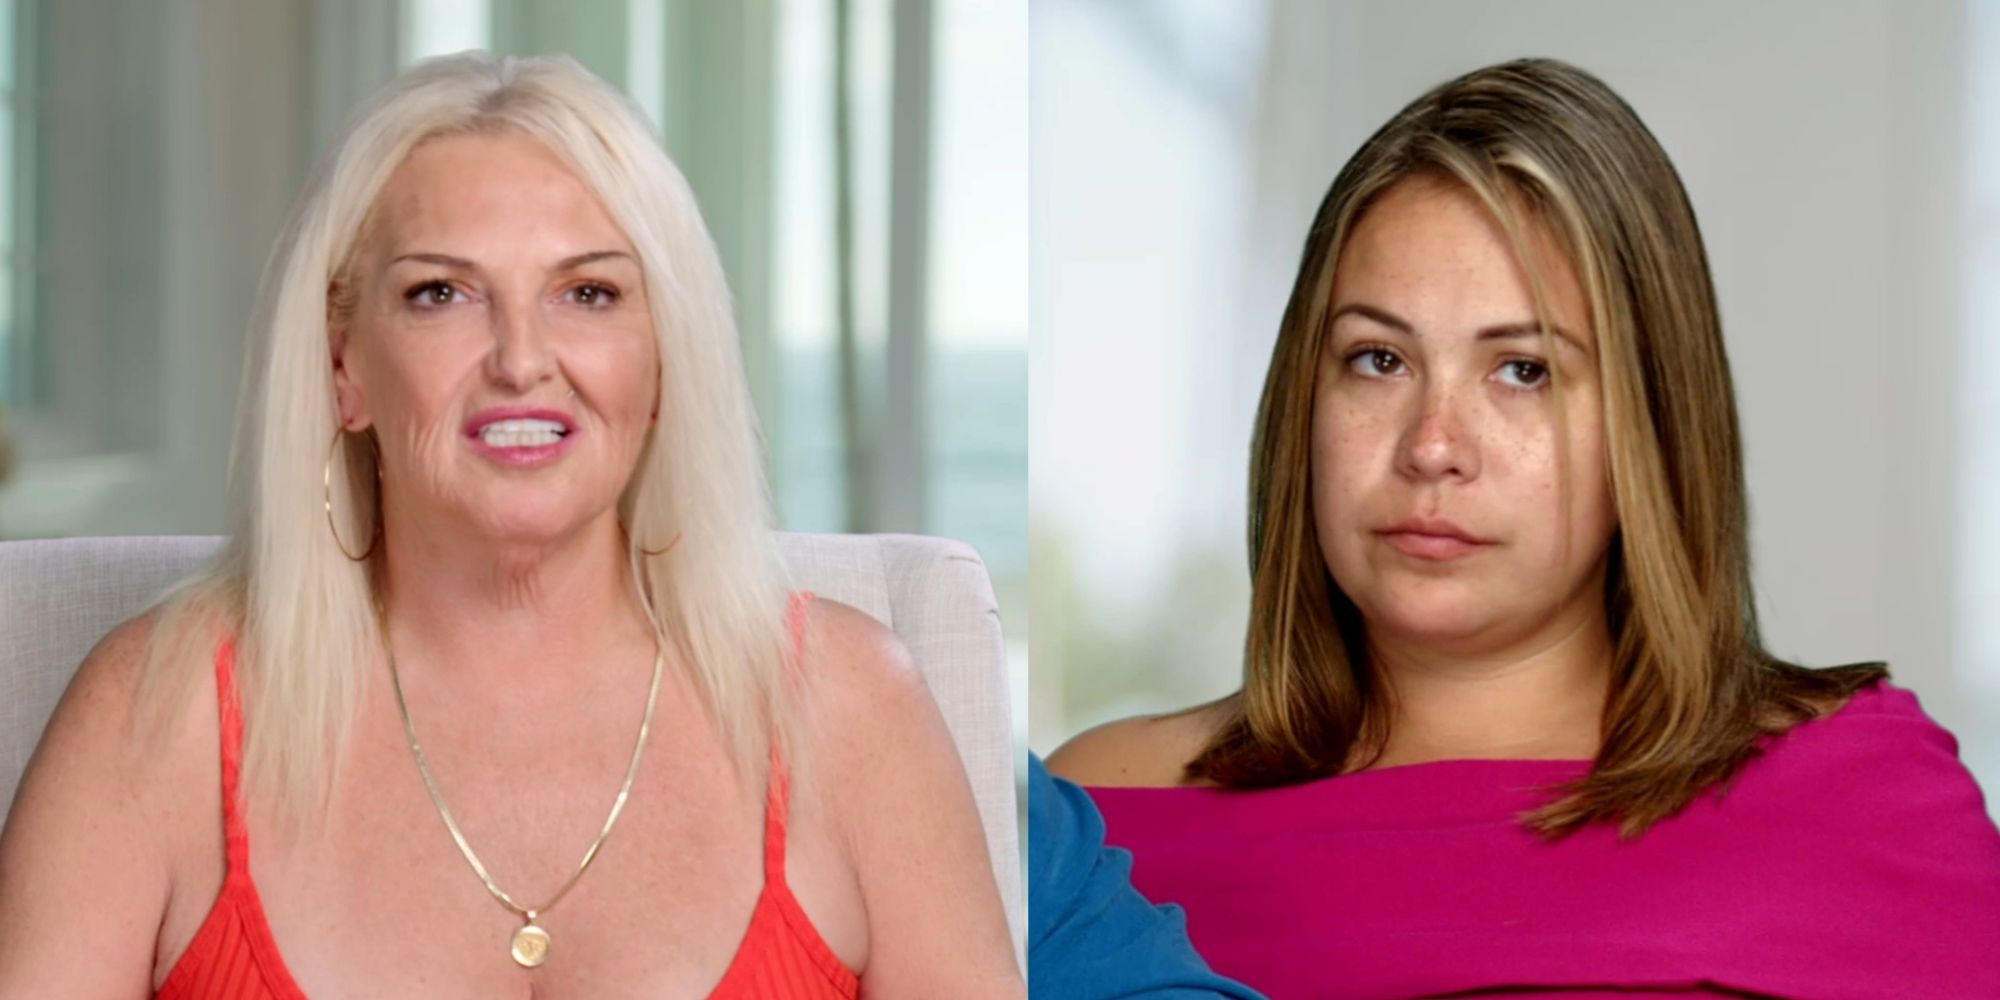 90 Day: The Last Resort- Angela Was Mean To Liz, But She’s Trying To Change On The Show